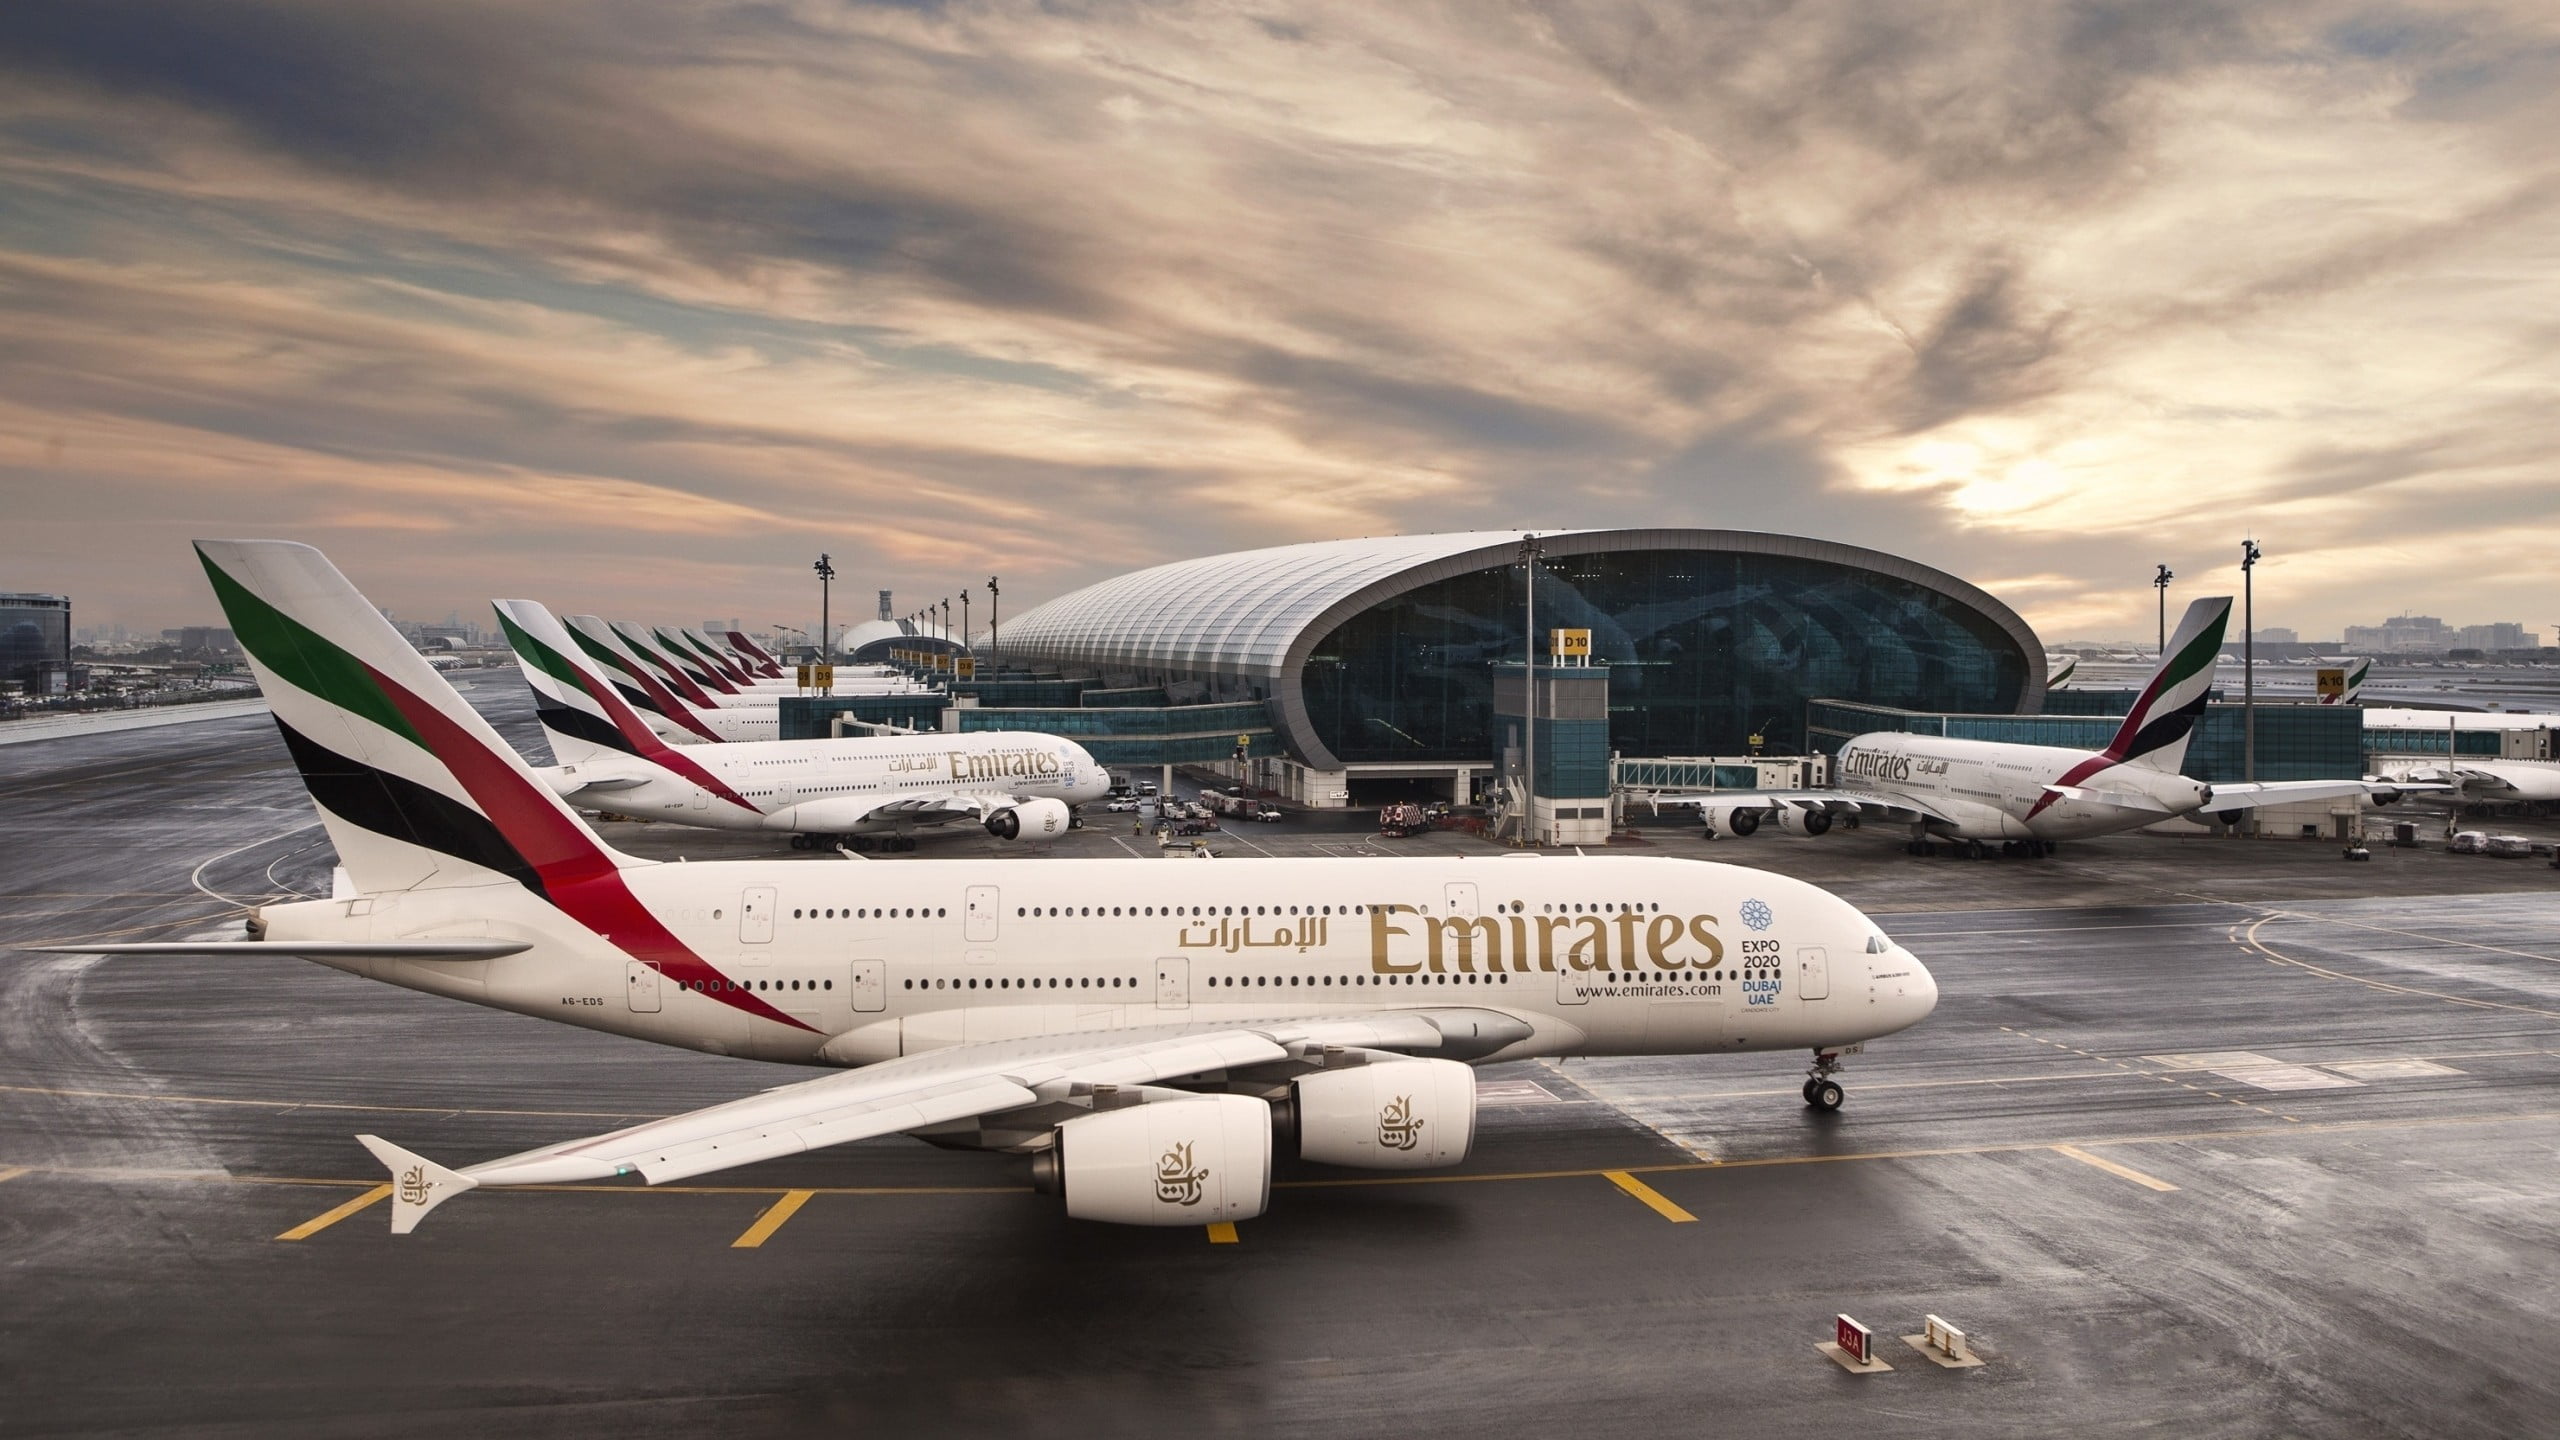 Emirates airliners, aircraft, airplane, passenger aircraft, airport